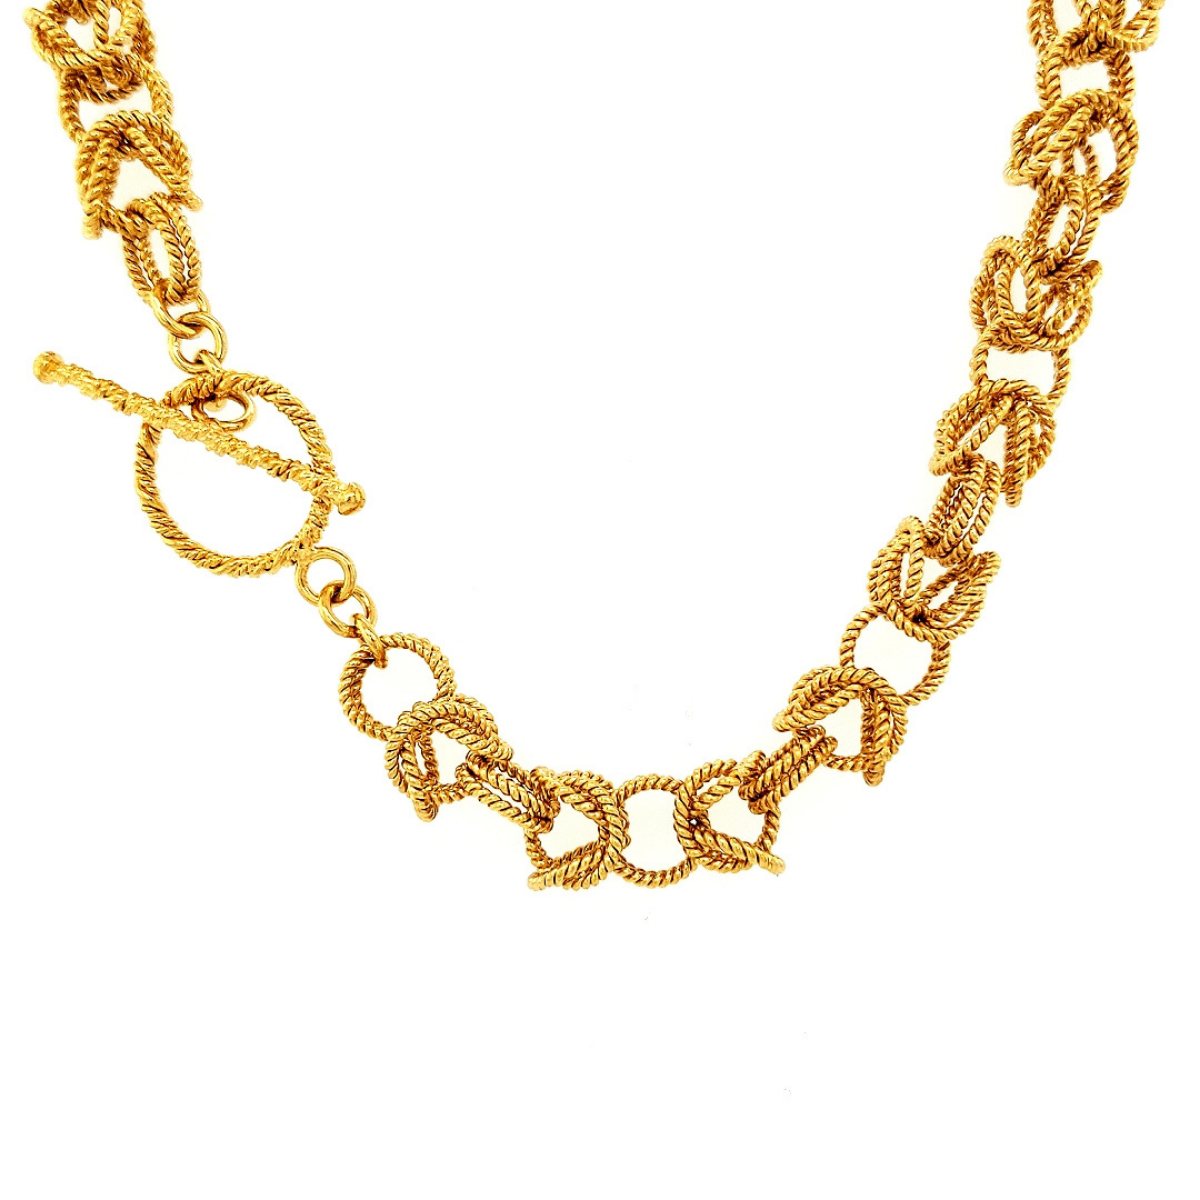 Loose Byzantine Vermeil Necklace - main image on white background / Arpaia Lang